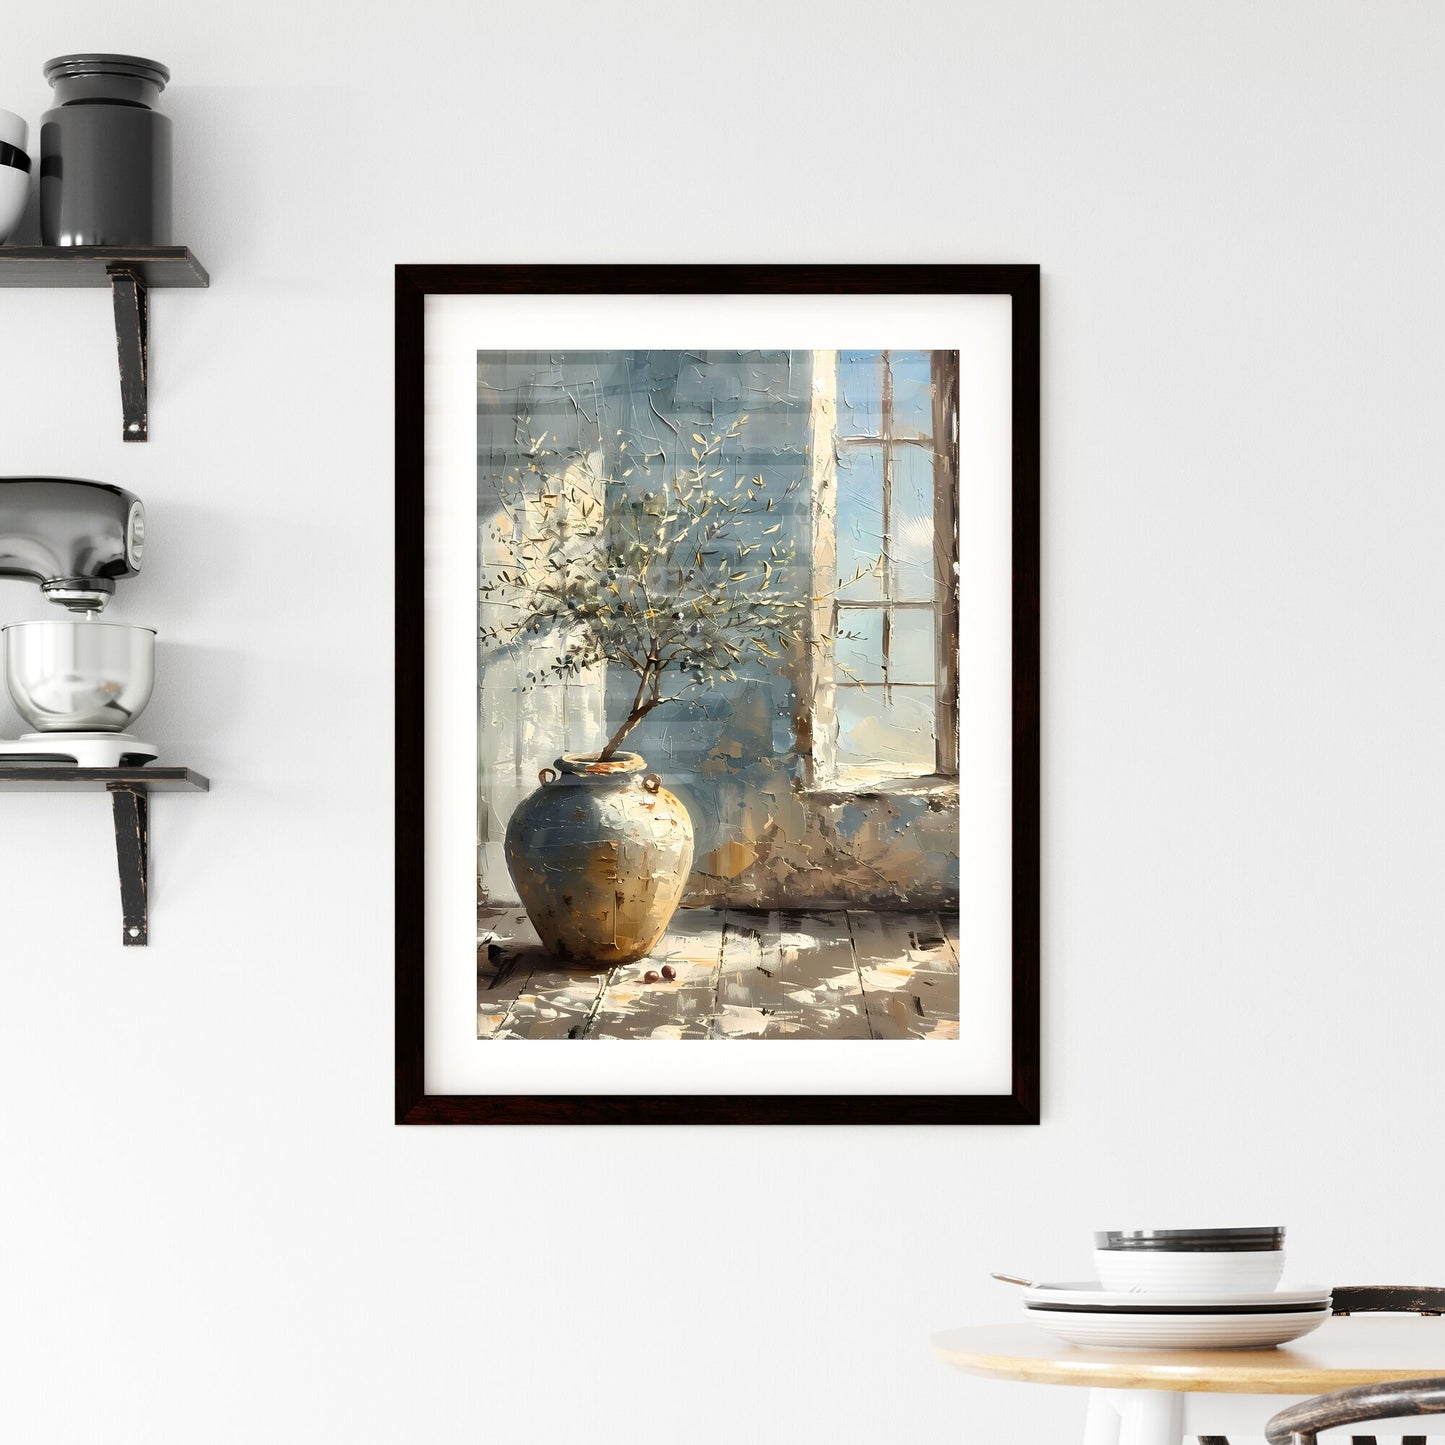 Captivating Vintage Oil Painting: Olive Tree in Whitewashed Pottery, Realistic Brushstrokes, Muted Colors, Art Print Default Title